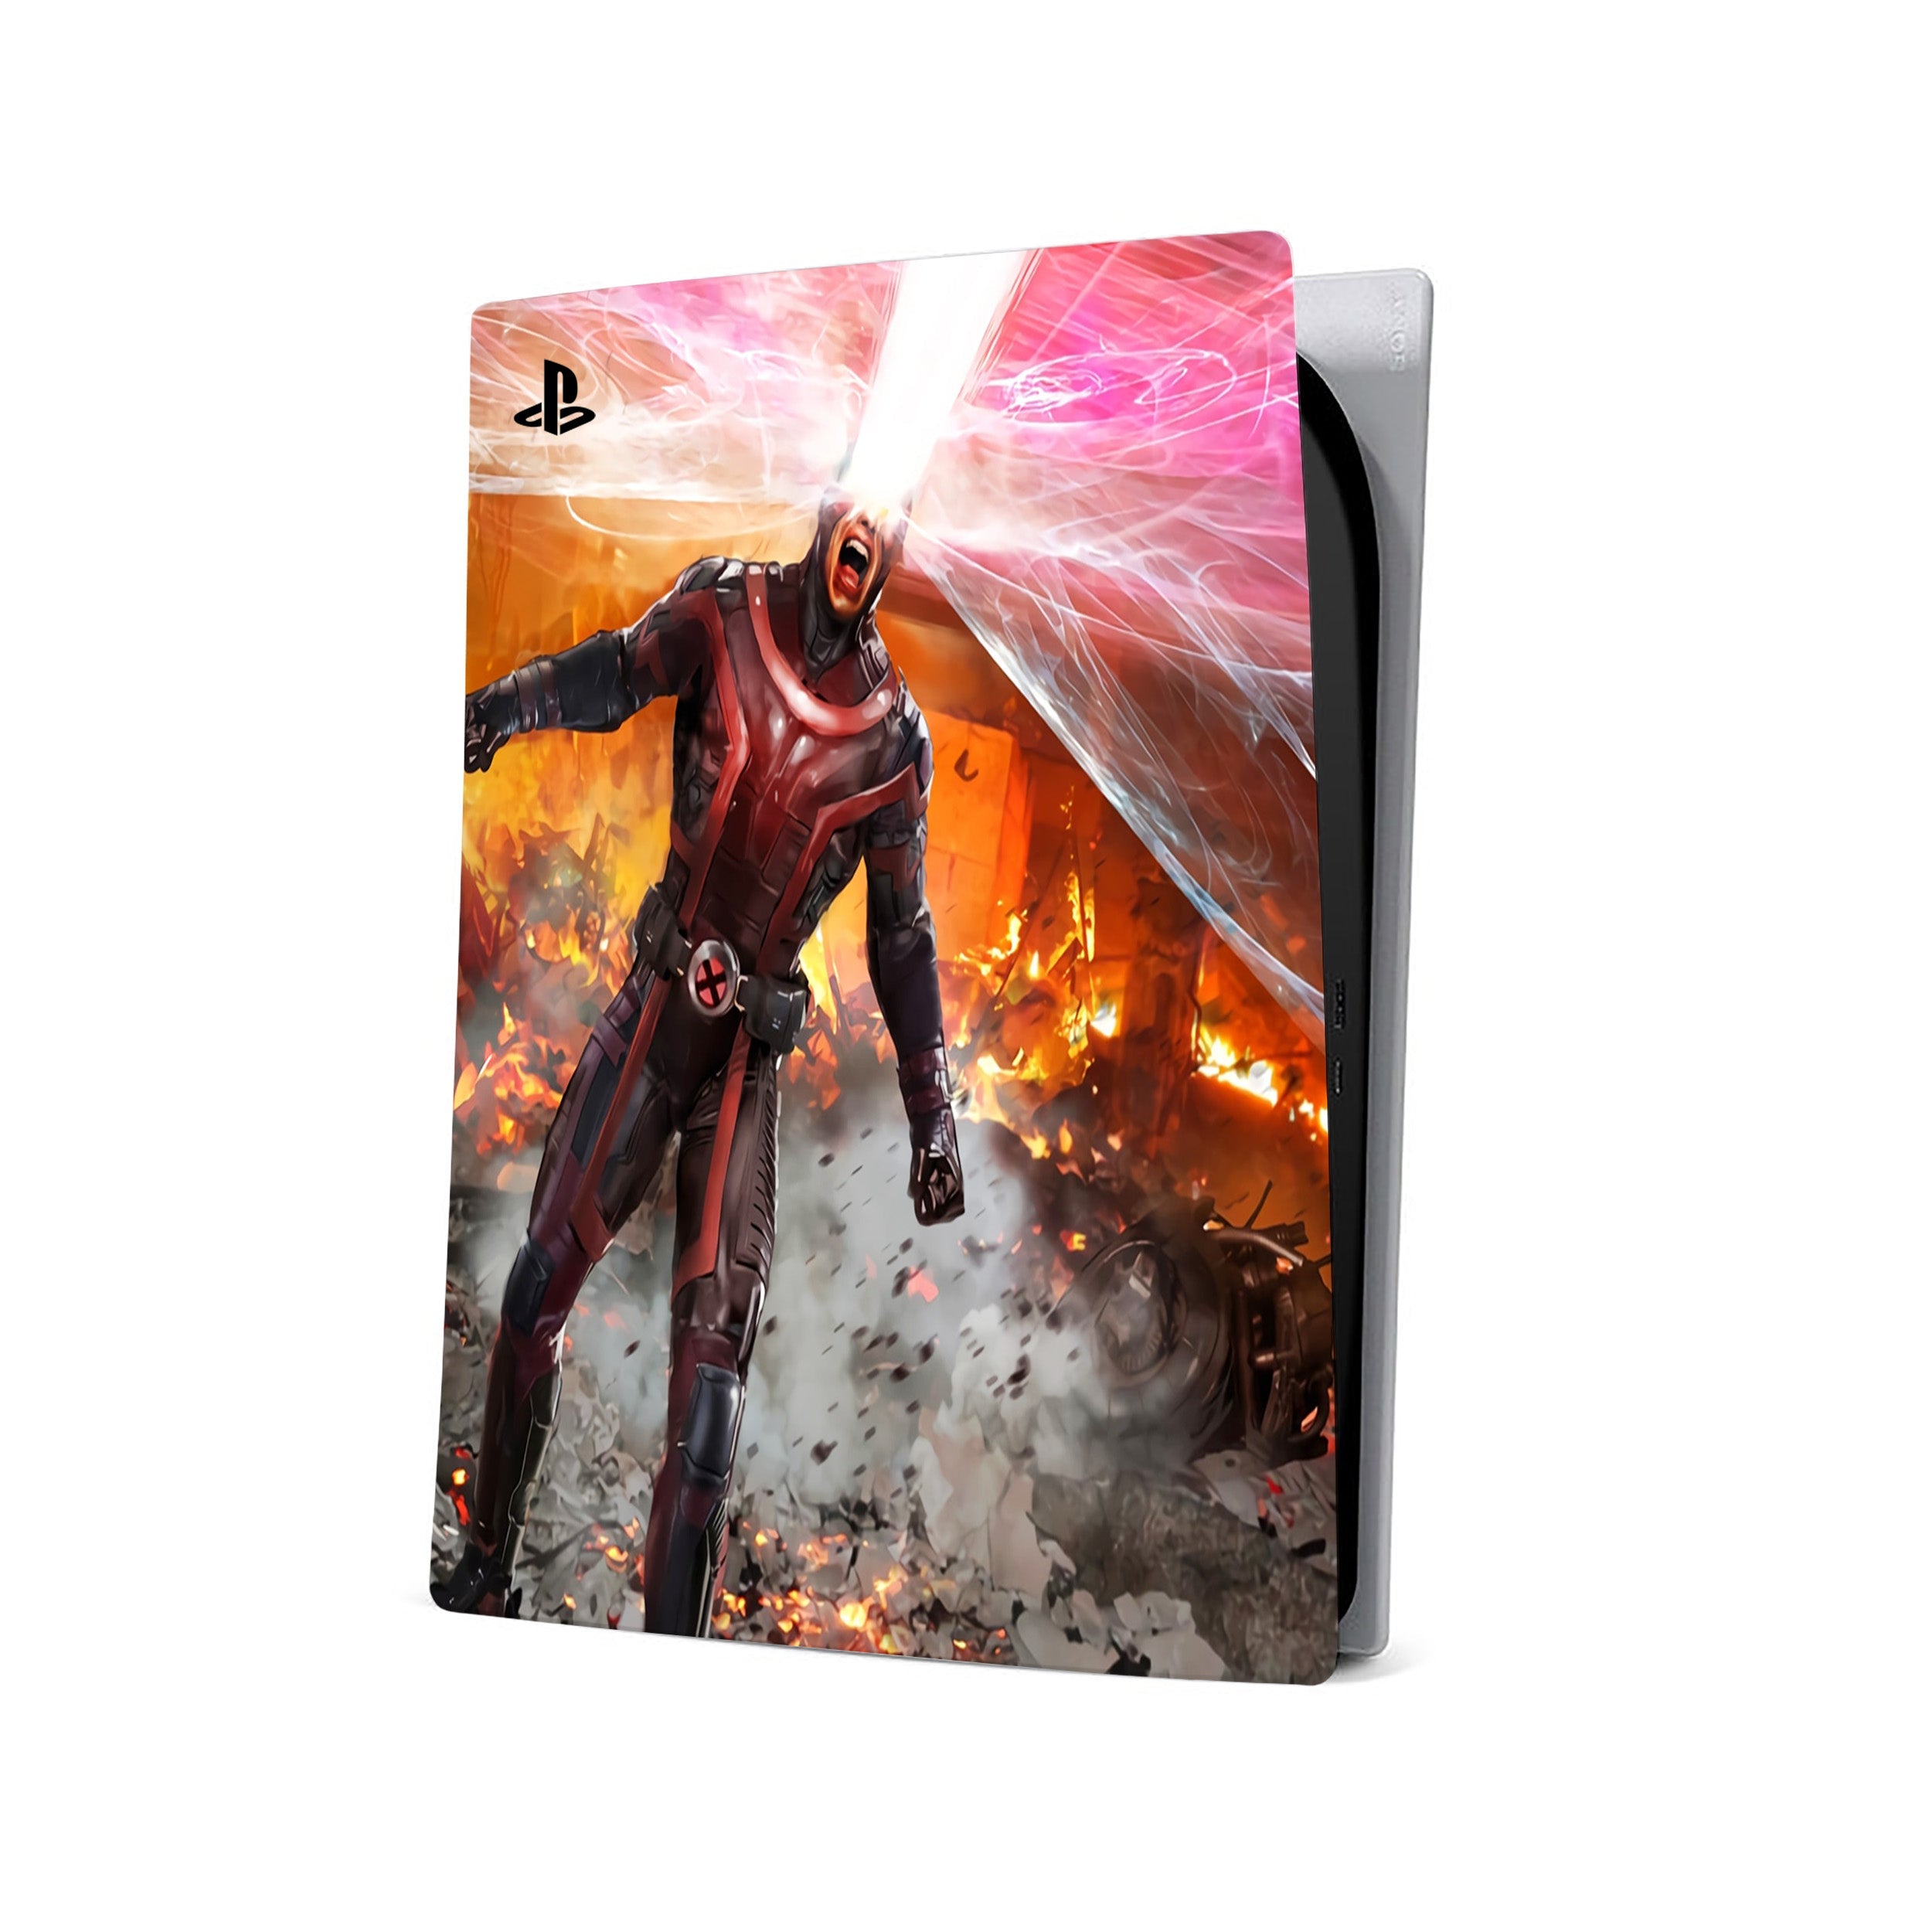 A video game skin featuring a Marvel X Men Cyclops design for the PS5.